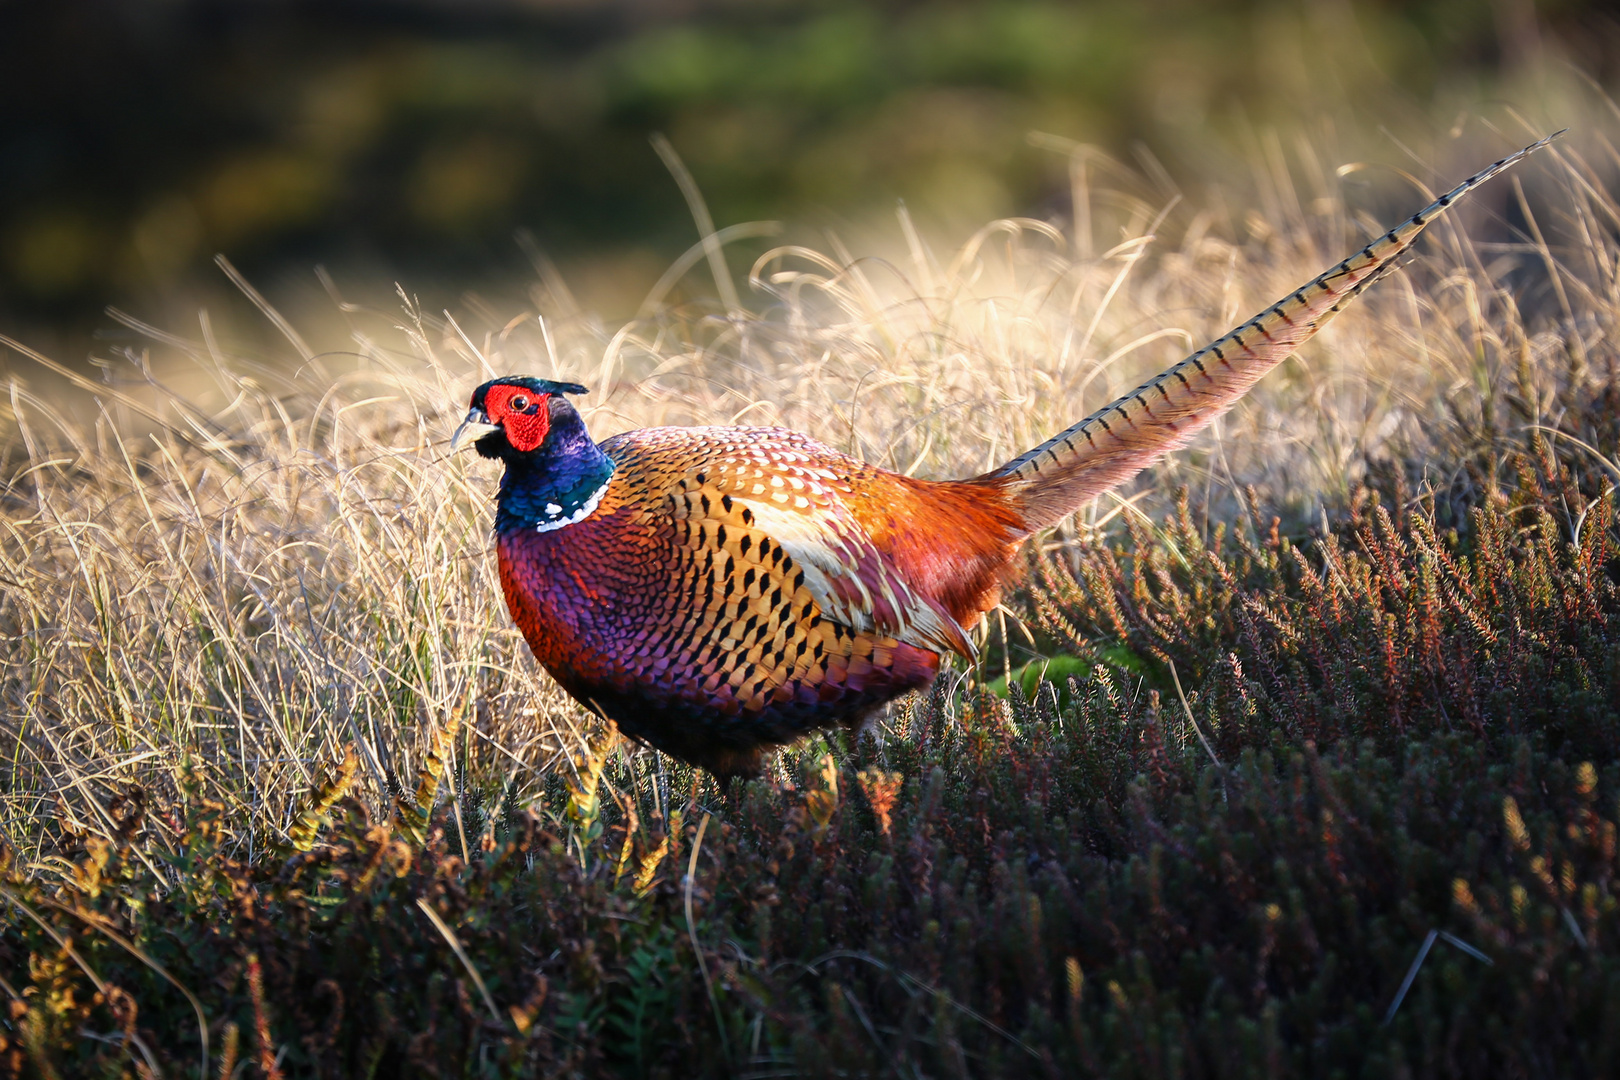 Pheasants - the locally most often spotted bird...